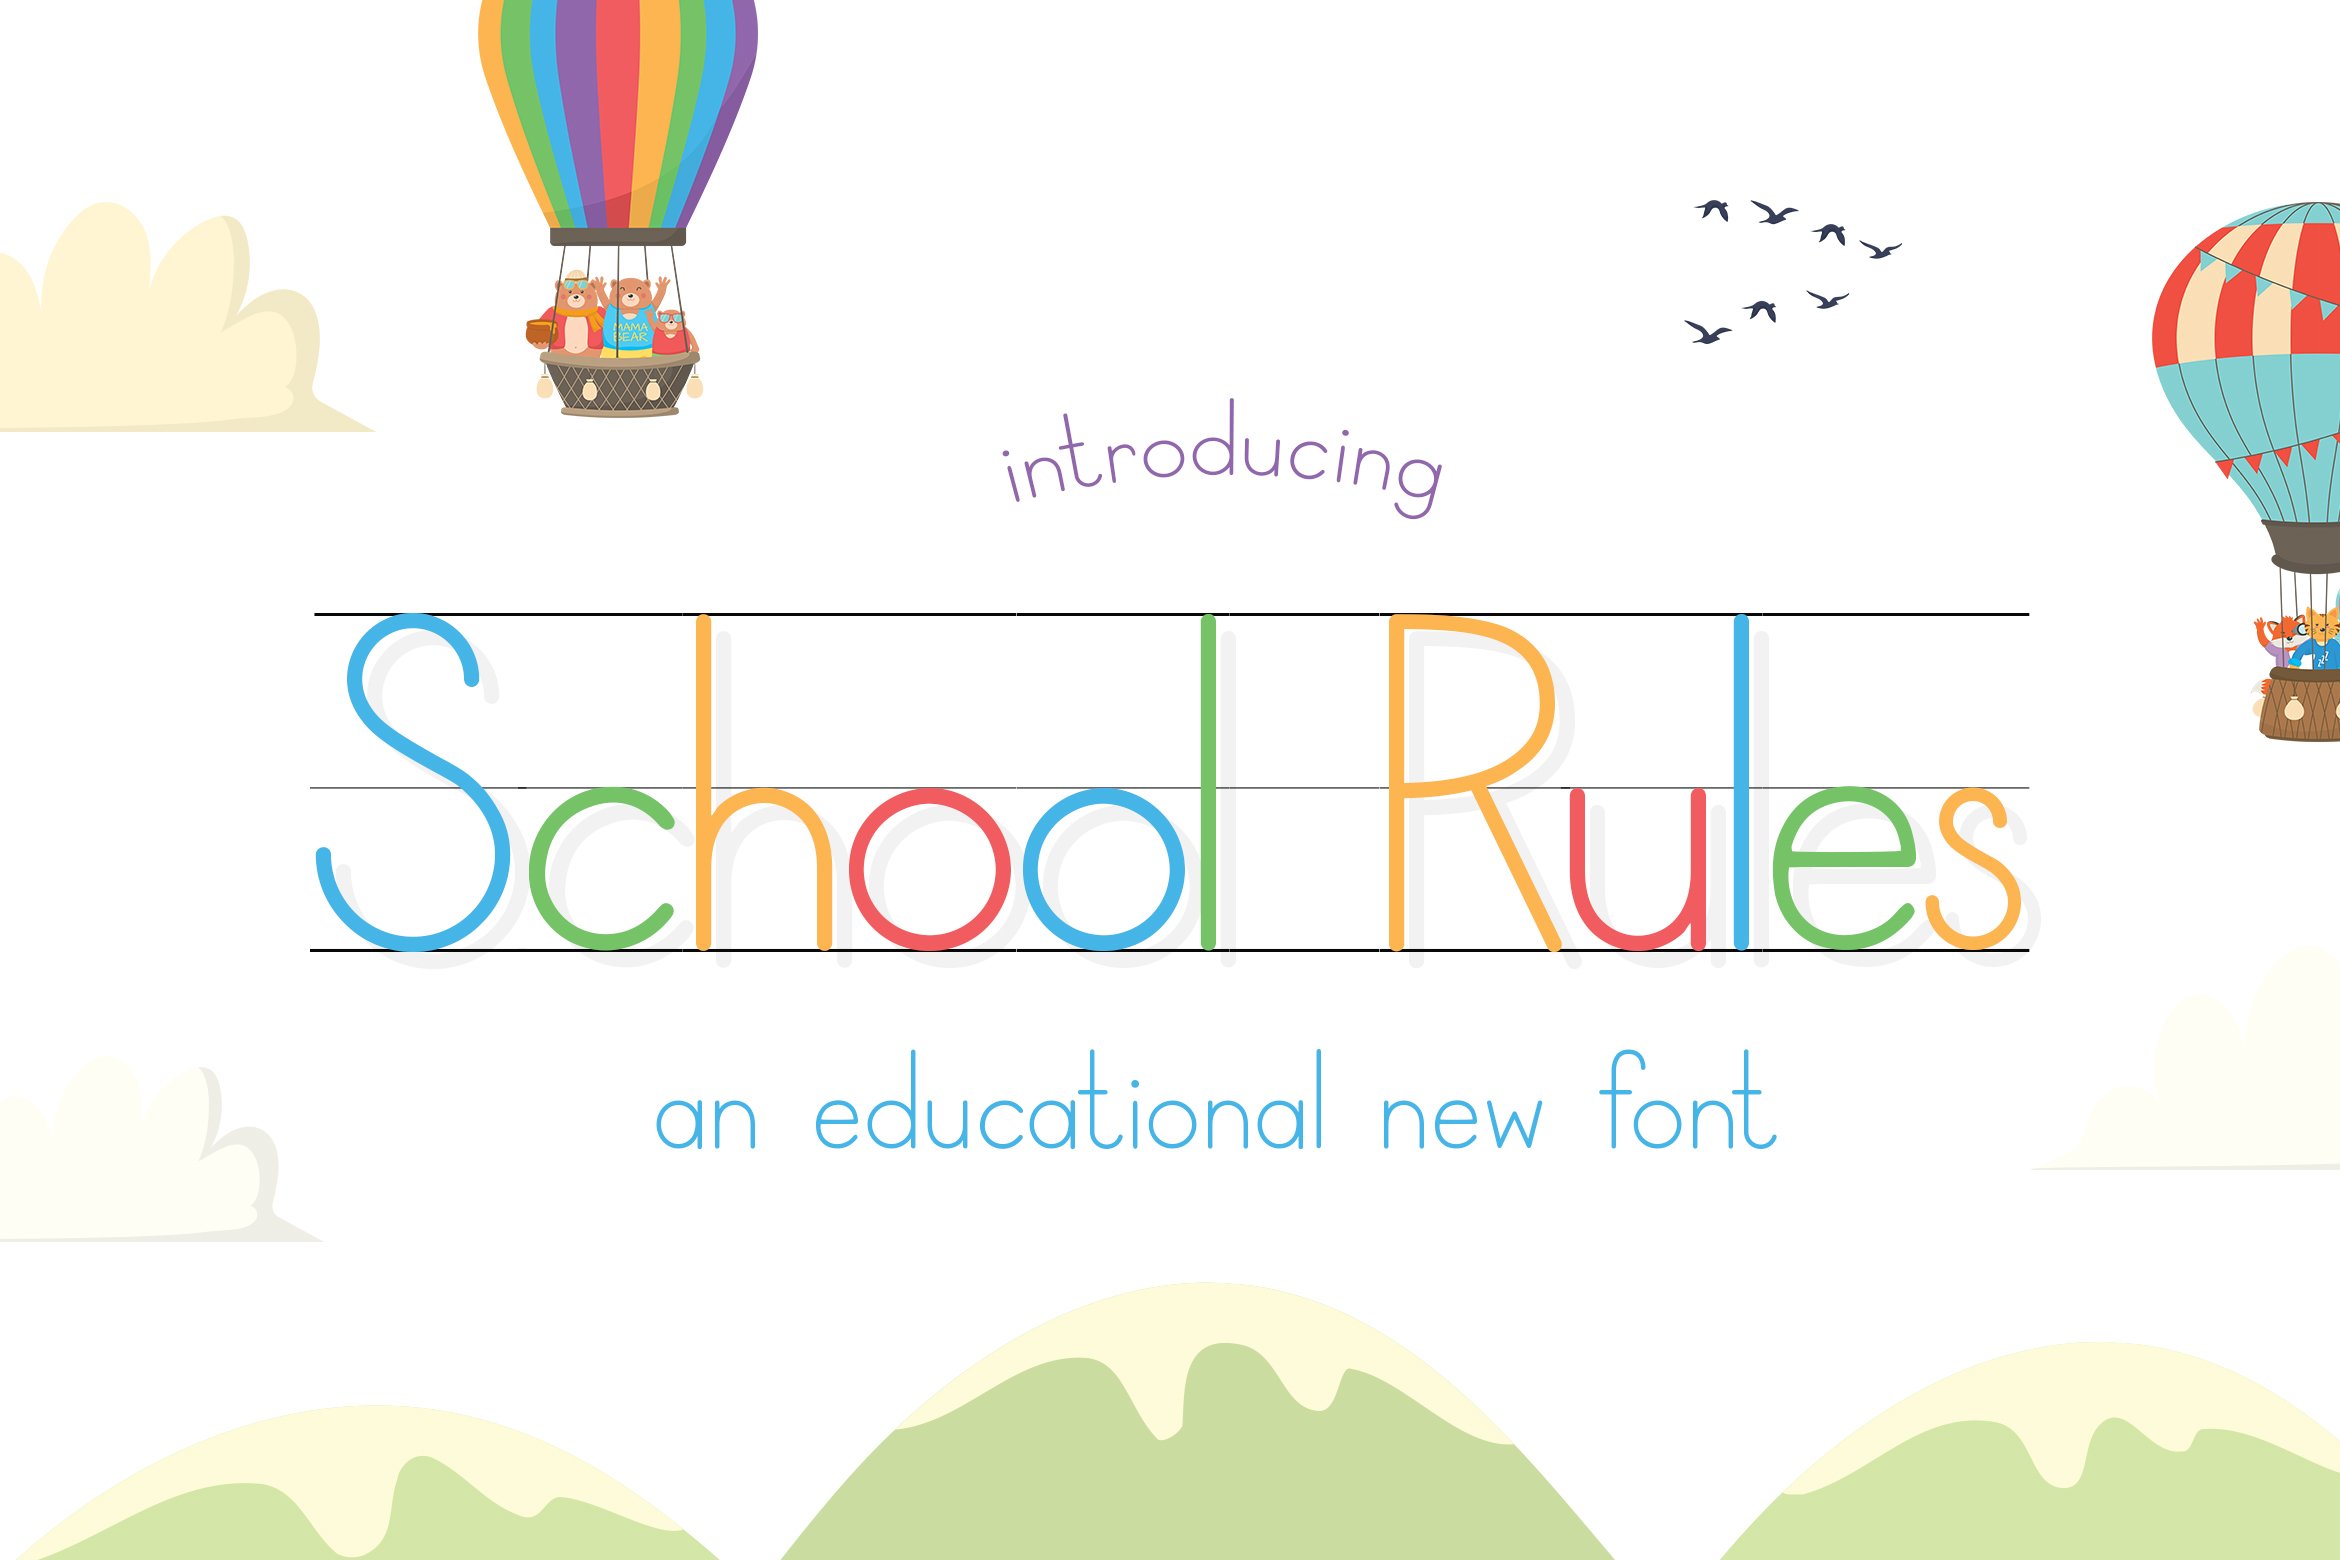 School Rules Font cover image.